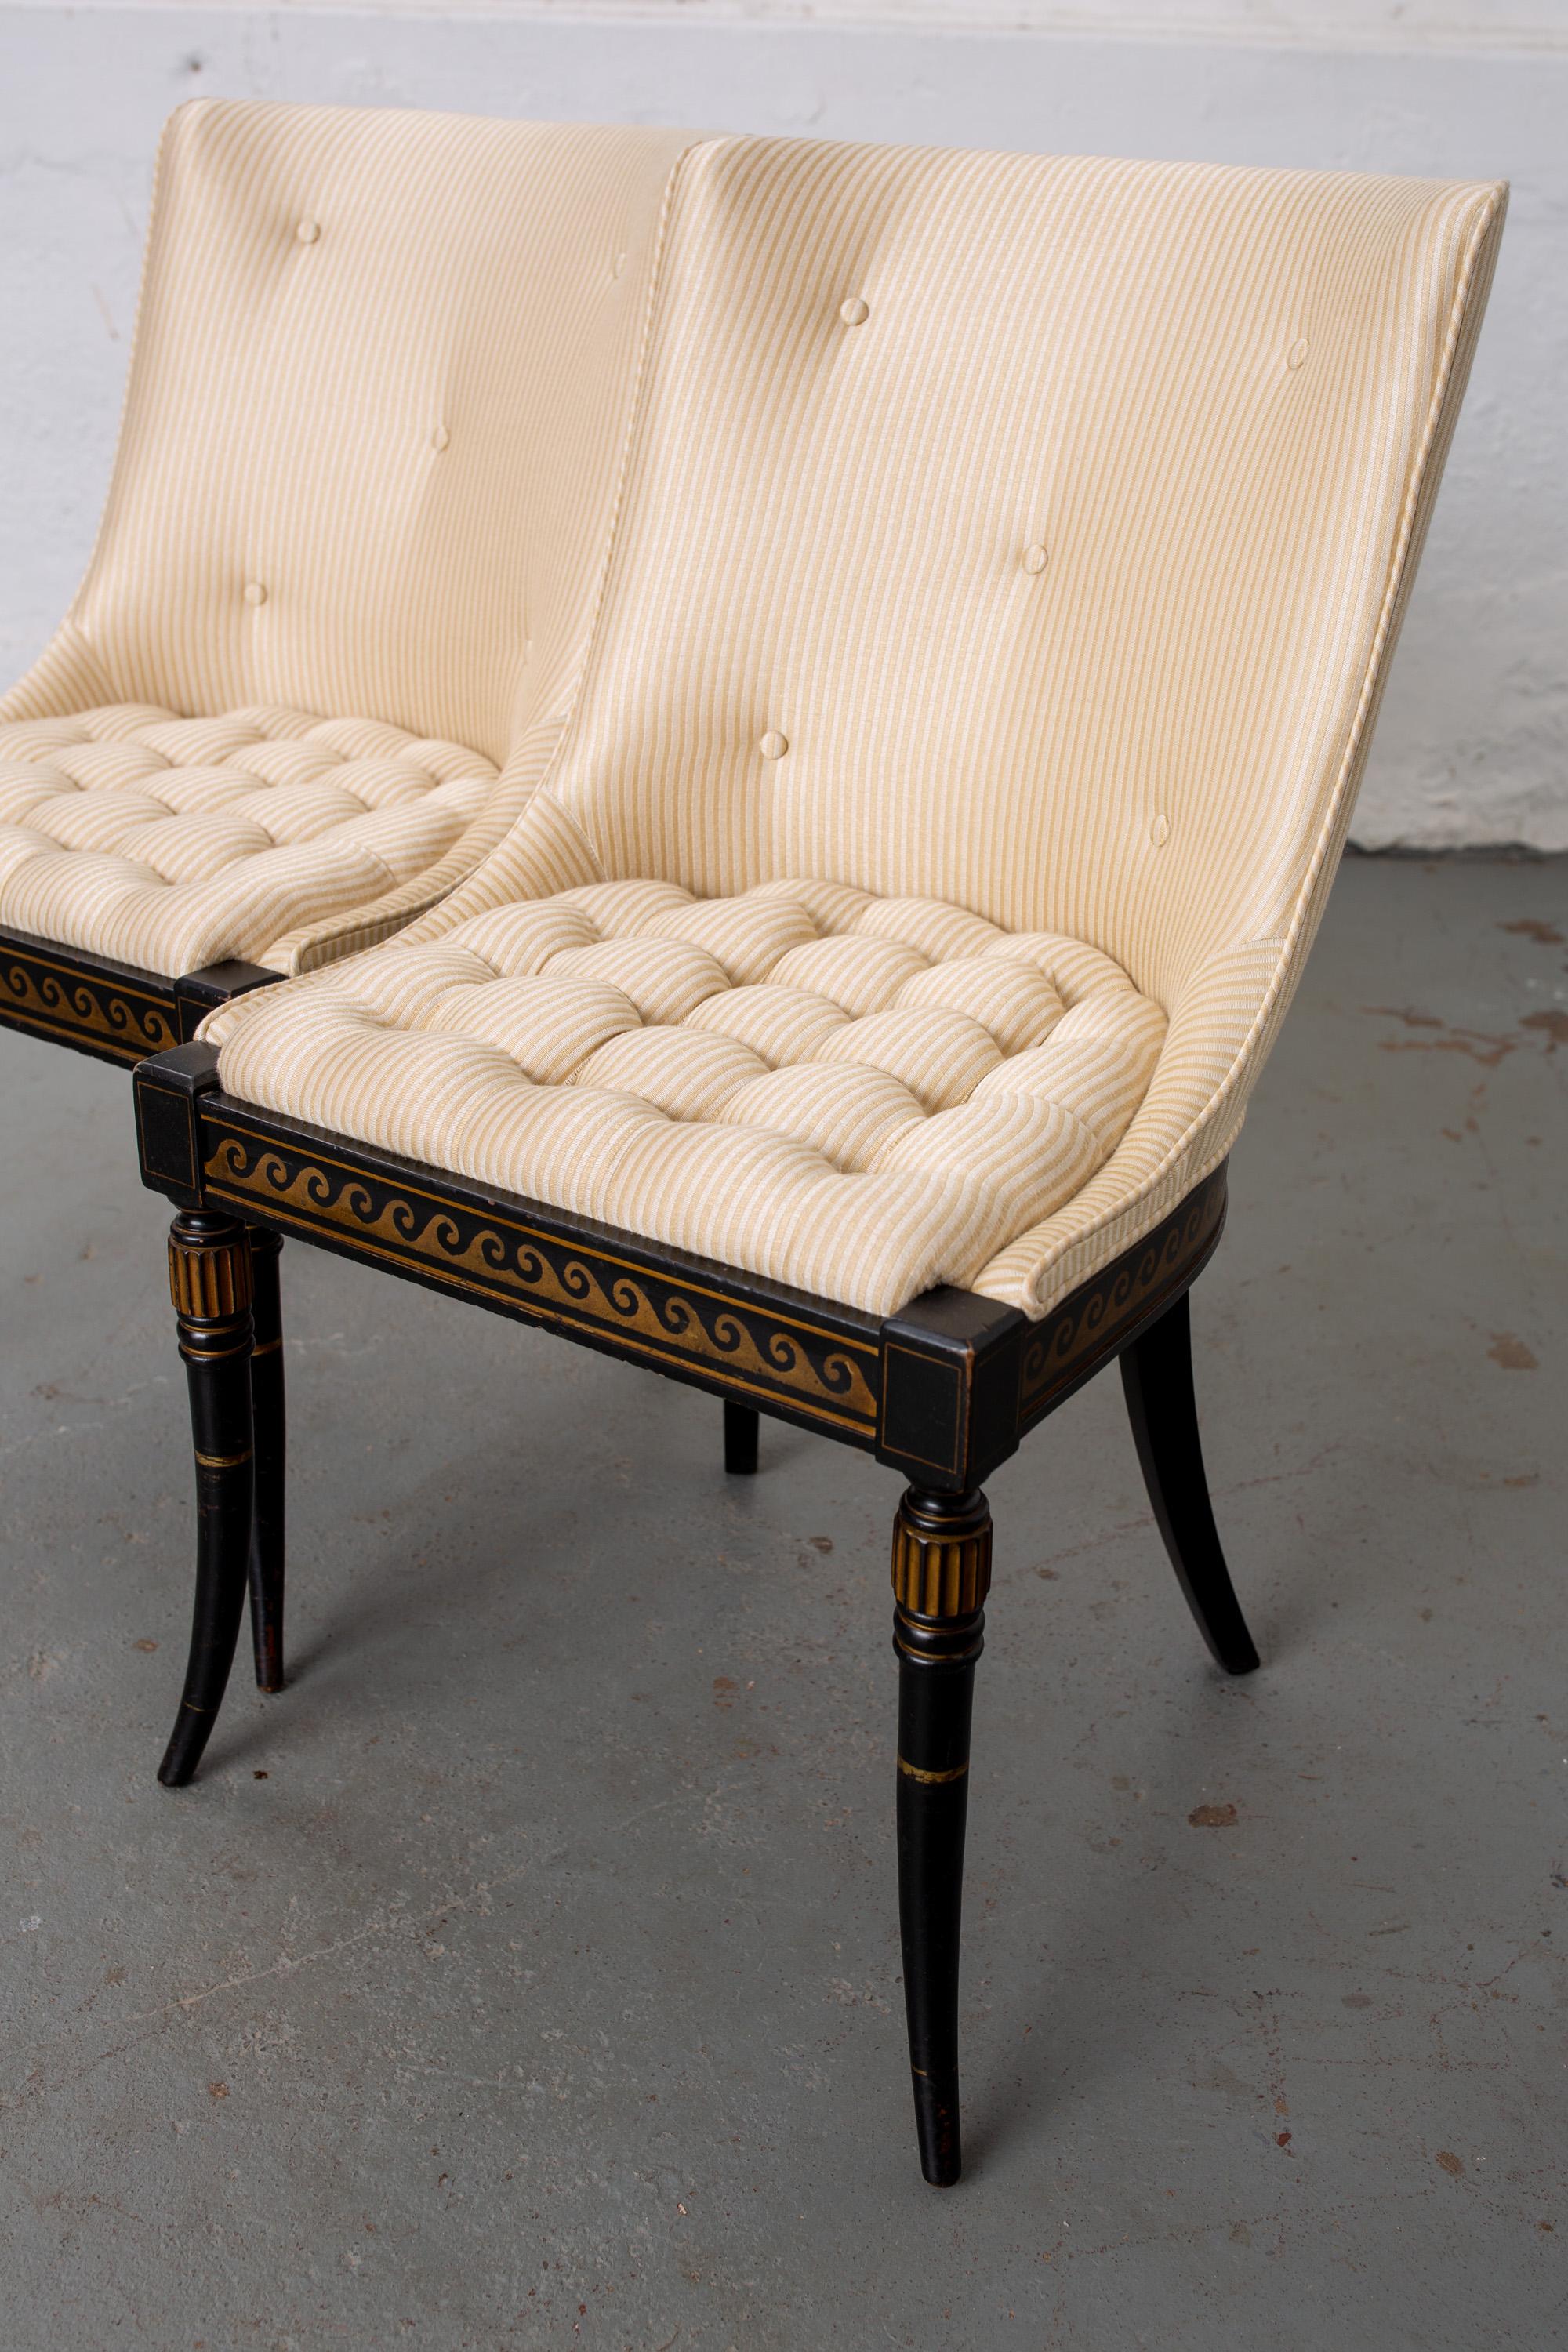 English Pair of Regency Style Button-Tufted Side Chairs